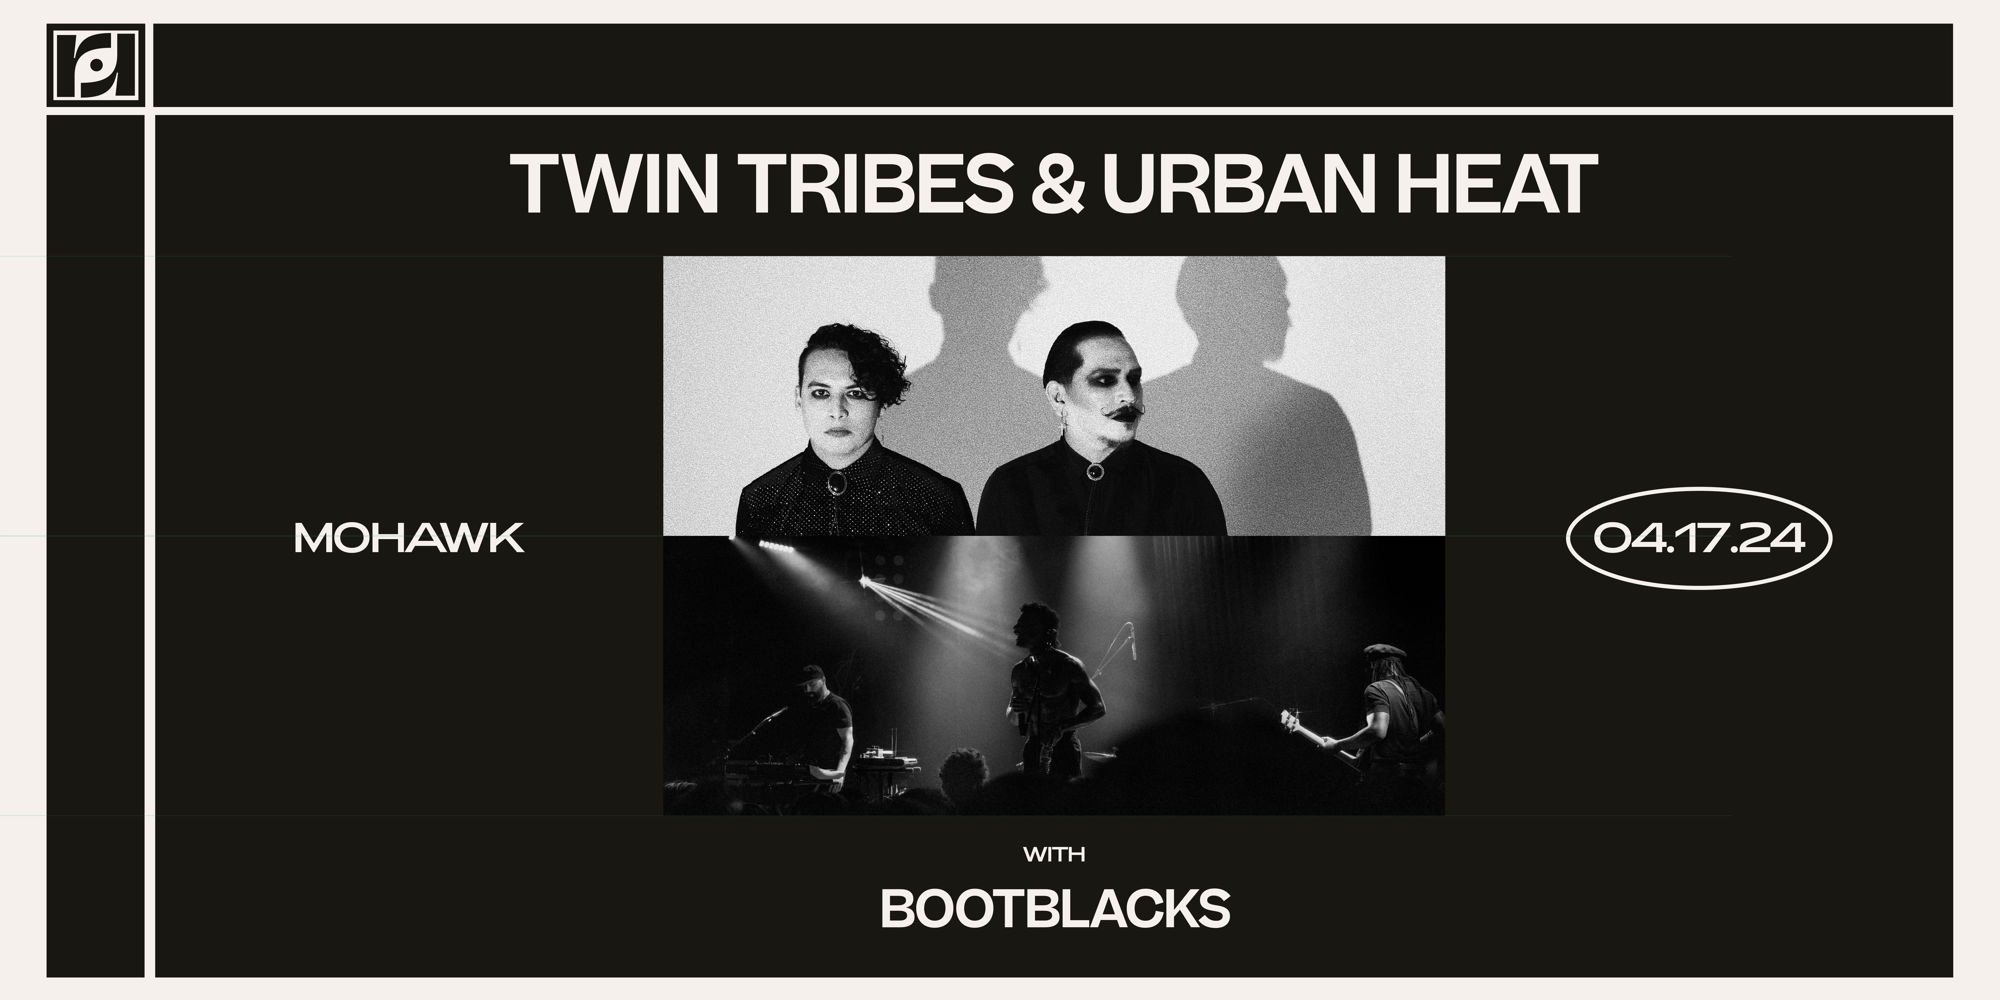 Resound Presents: Twin Tribes & Urban Heat w/ Bootblacks at Mohawk promotional image